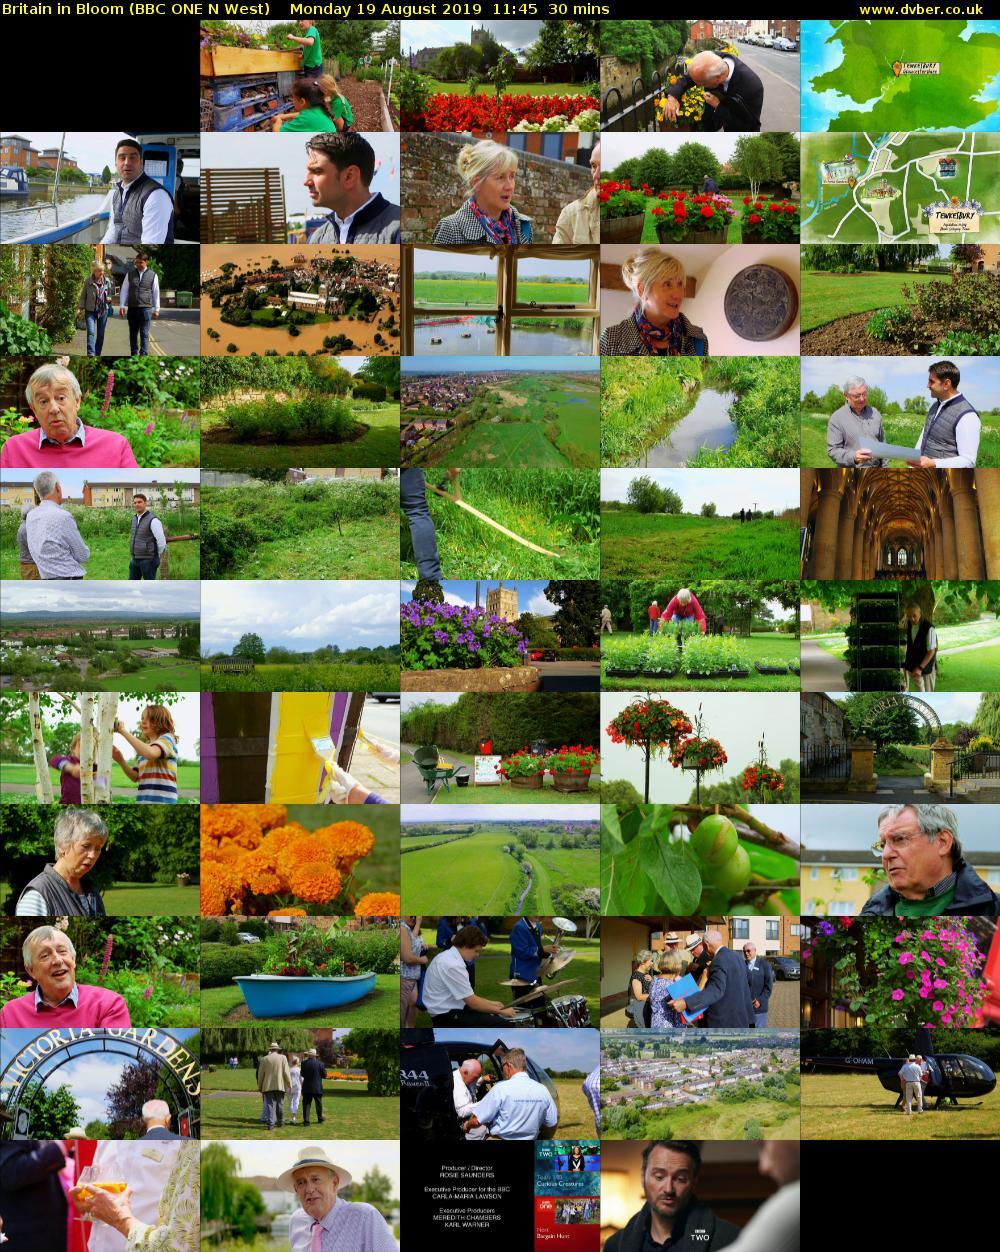 Britain in Bloom (BBC ONE N West) Monday 19 August 2019 11:45 - 12:15